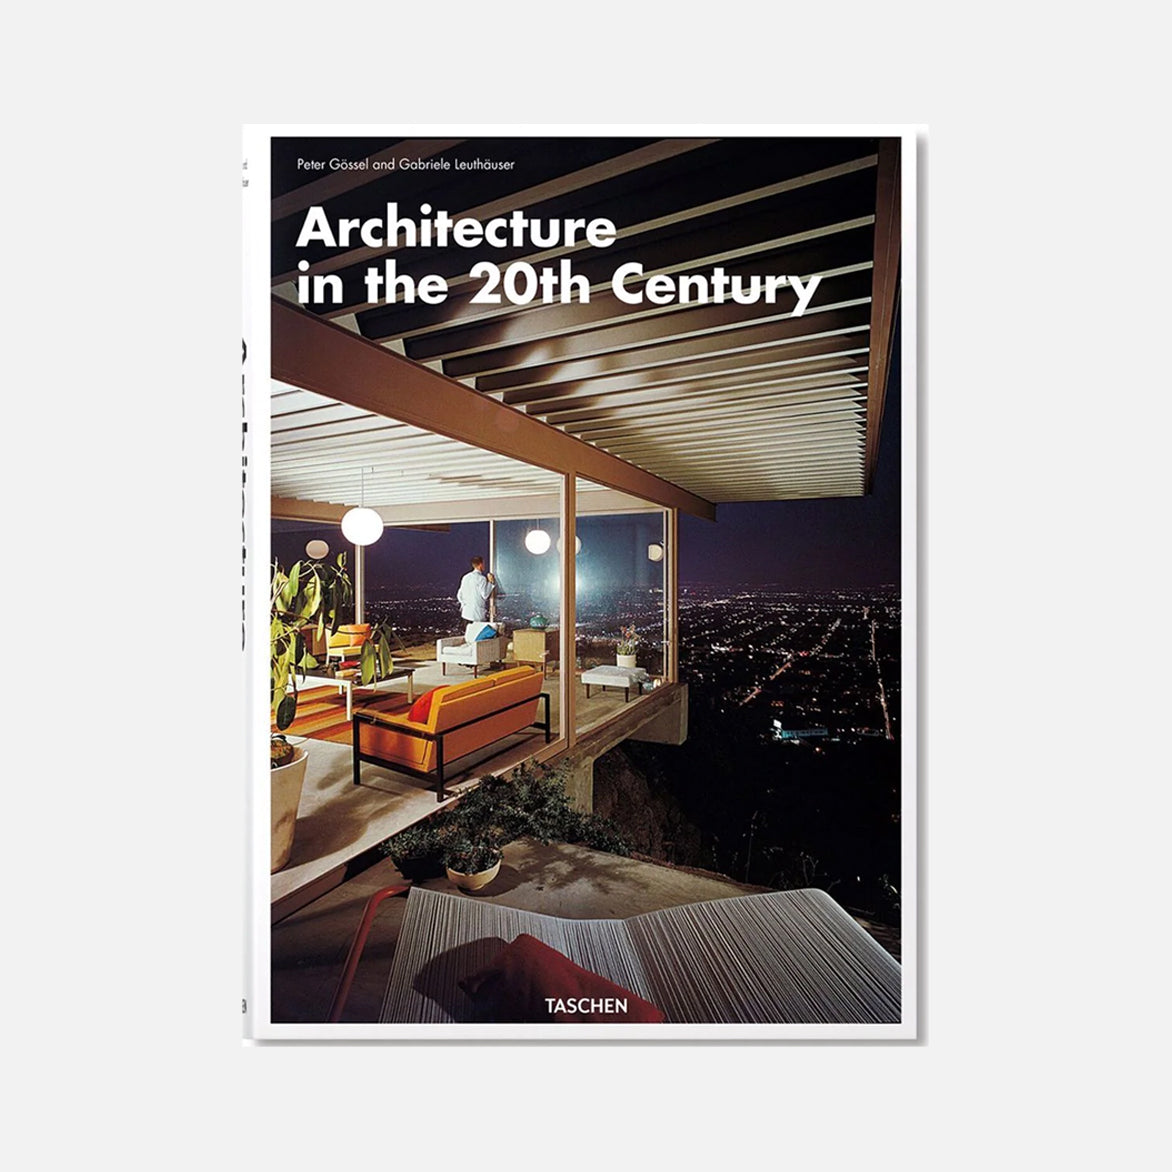 ARCHITECTURE IN THE 20TH CENTURY